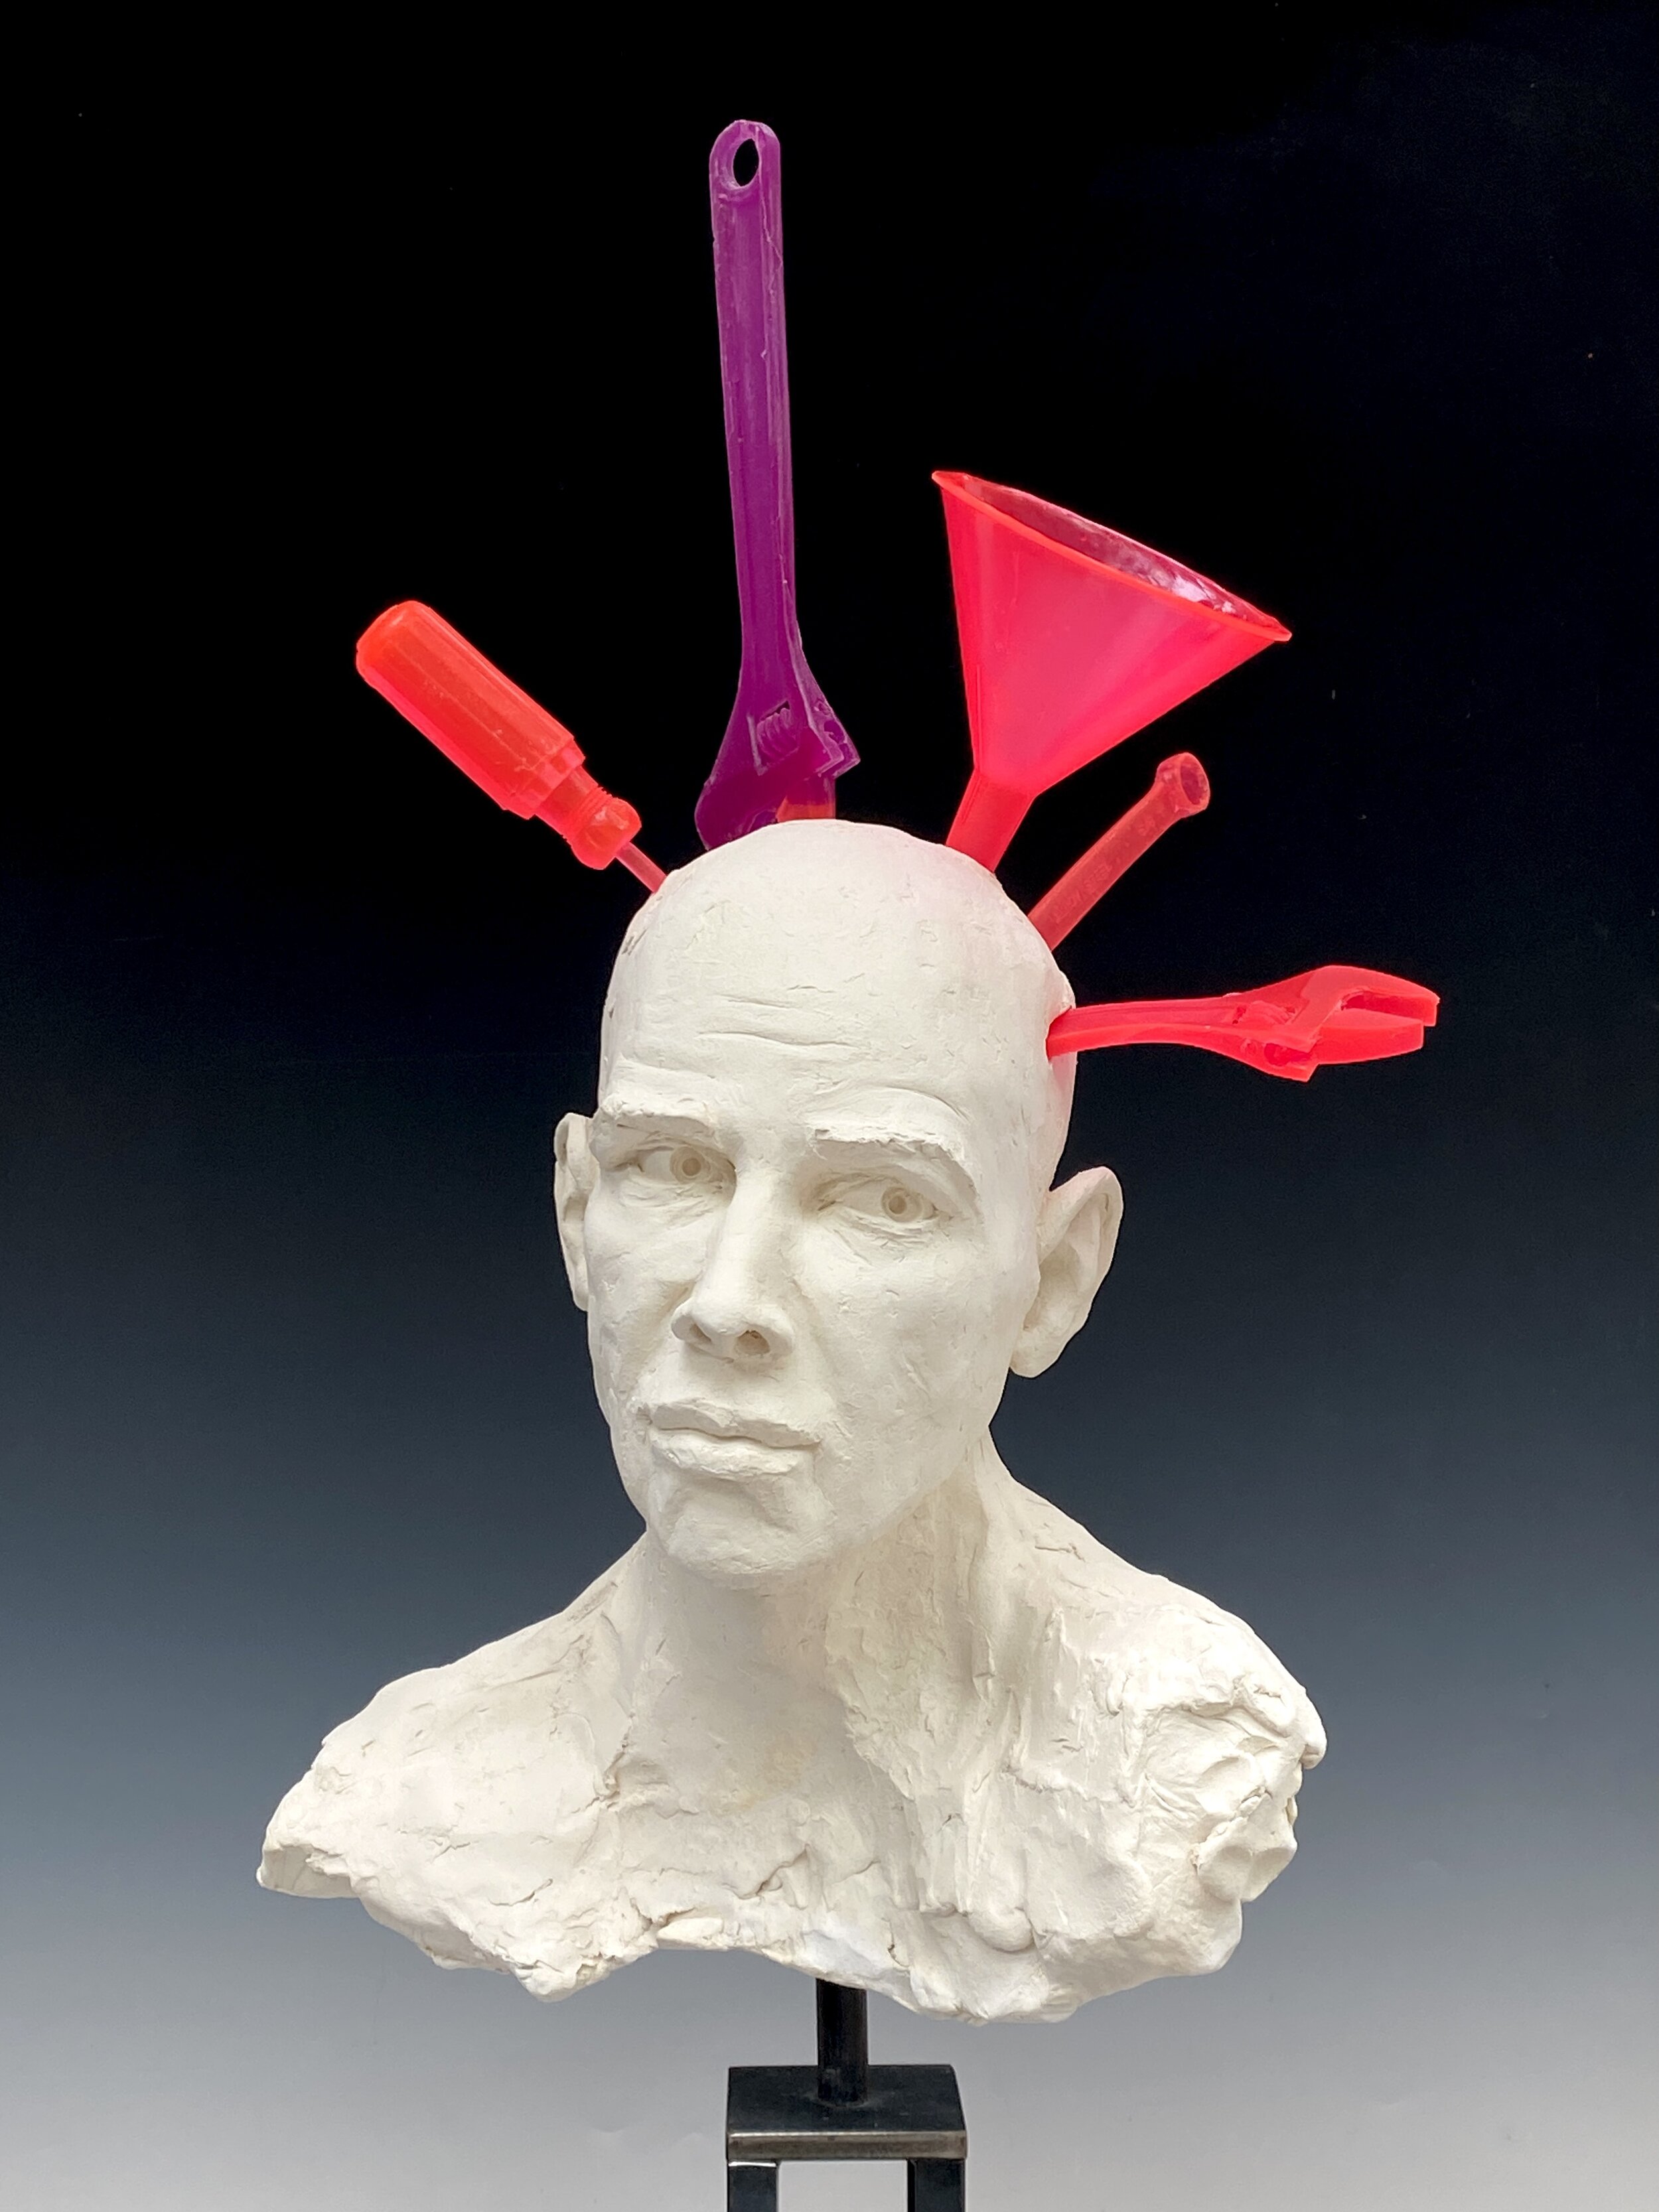    Man’s Head with Tools and Funnel  , 2021, Lifesize bisque-fired stoneware and resin on steel pedestal 